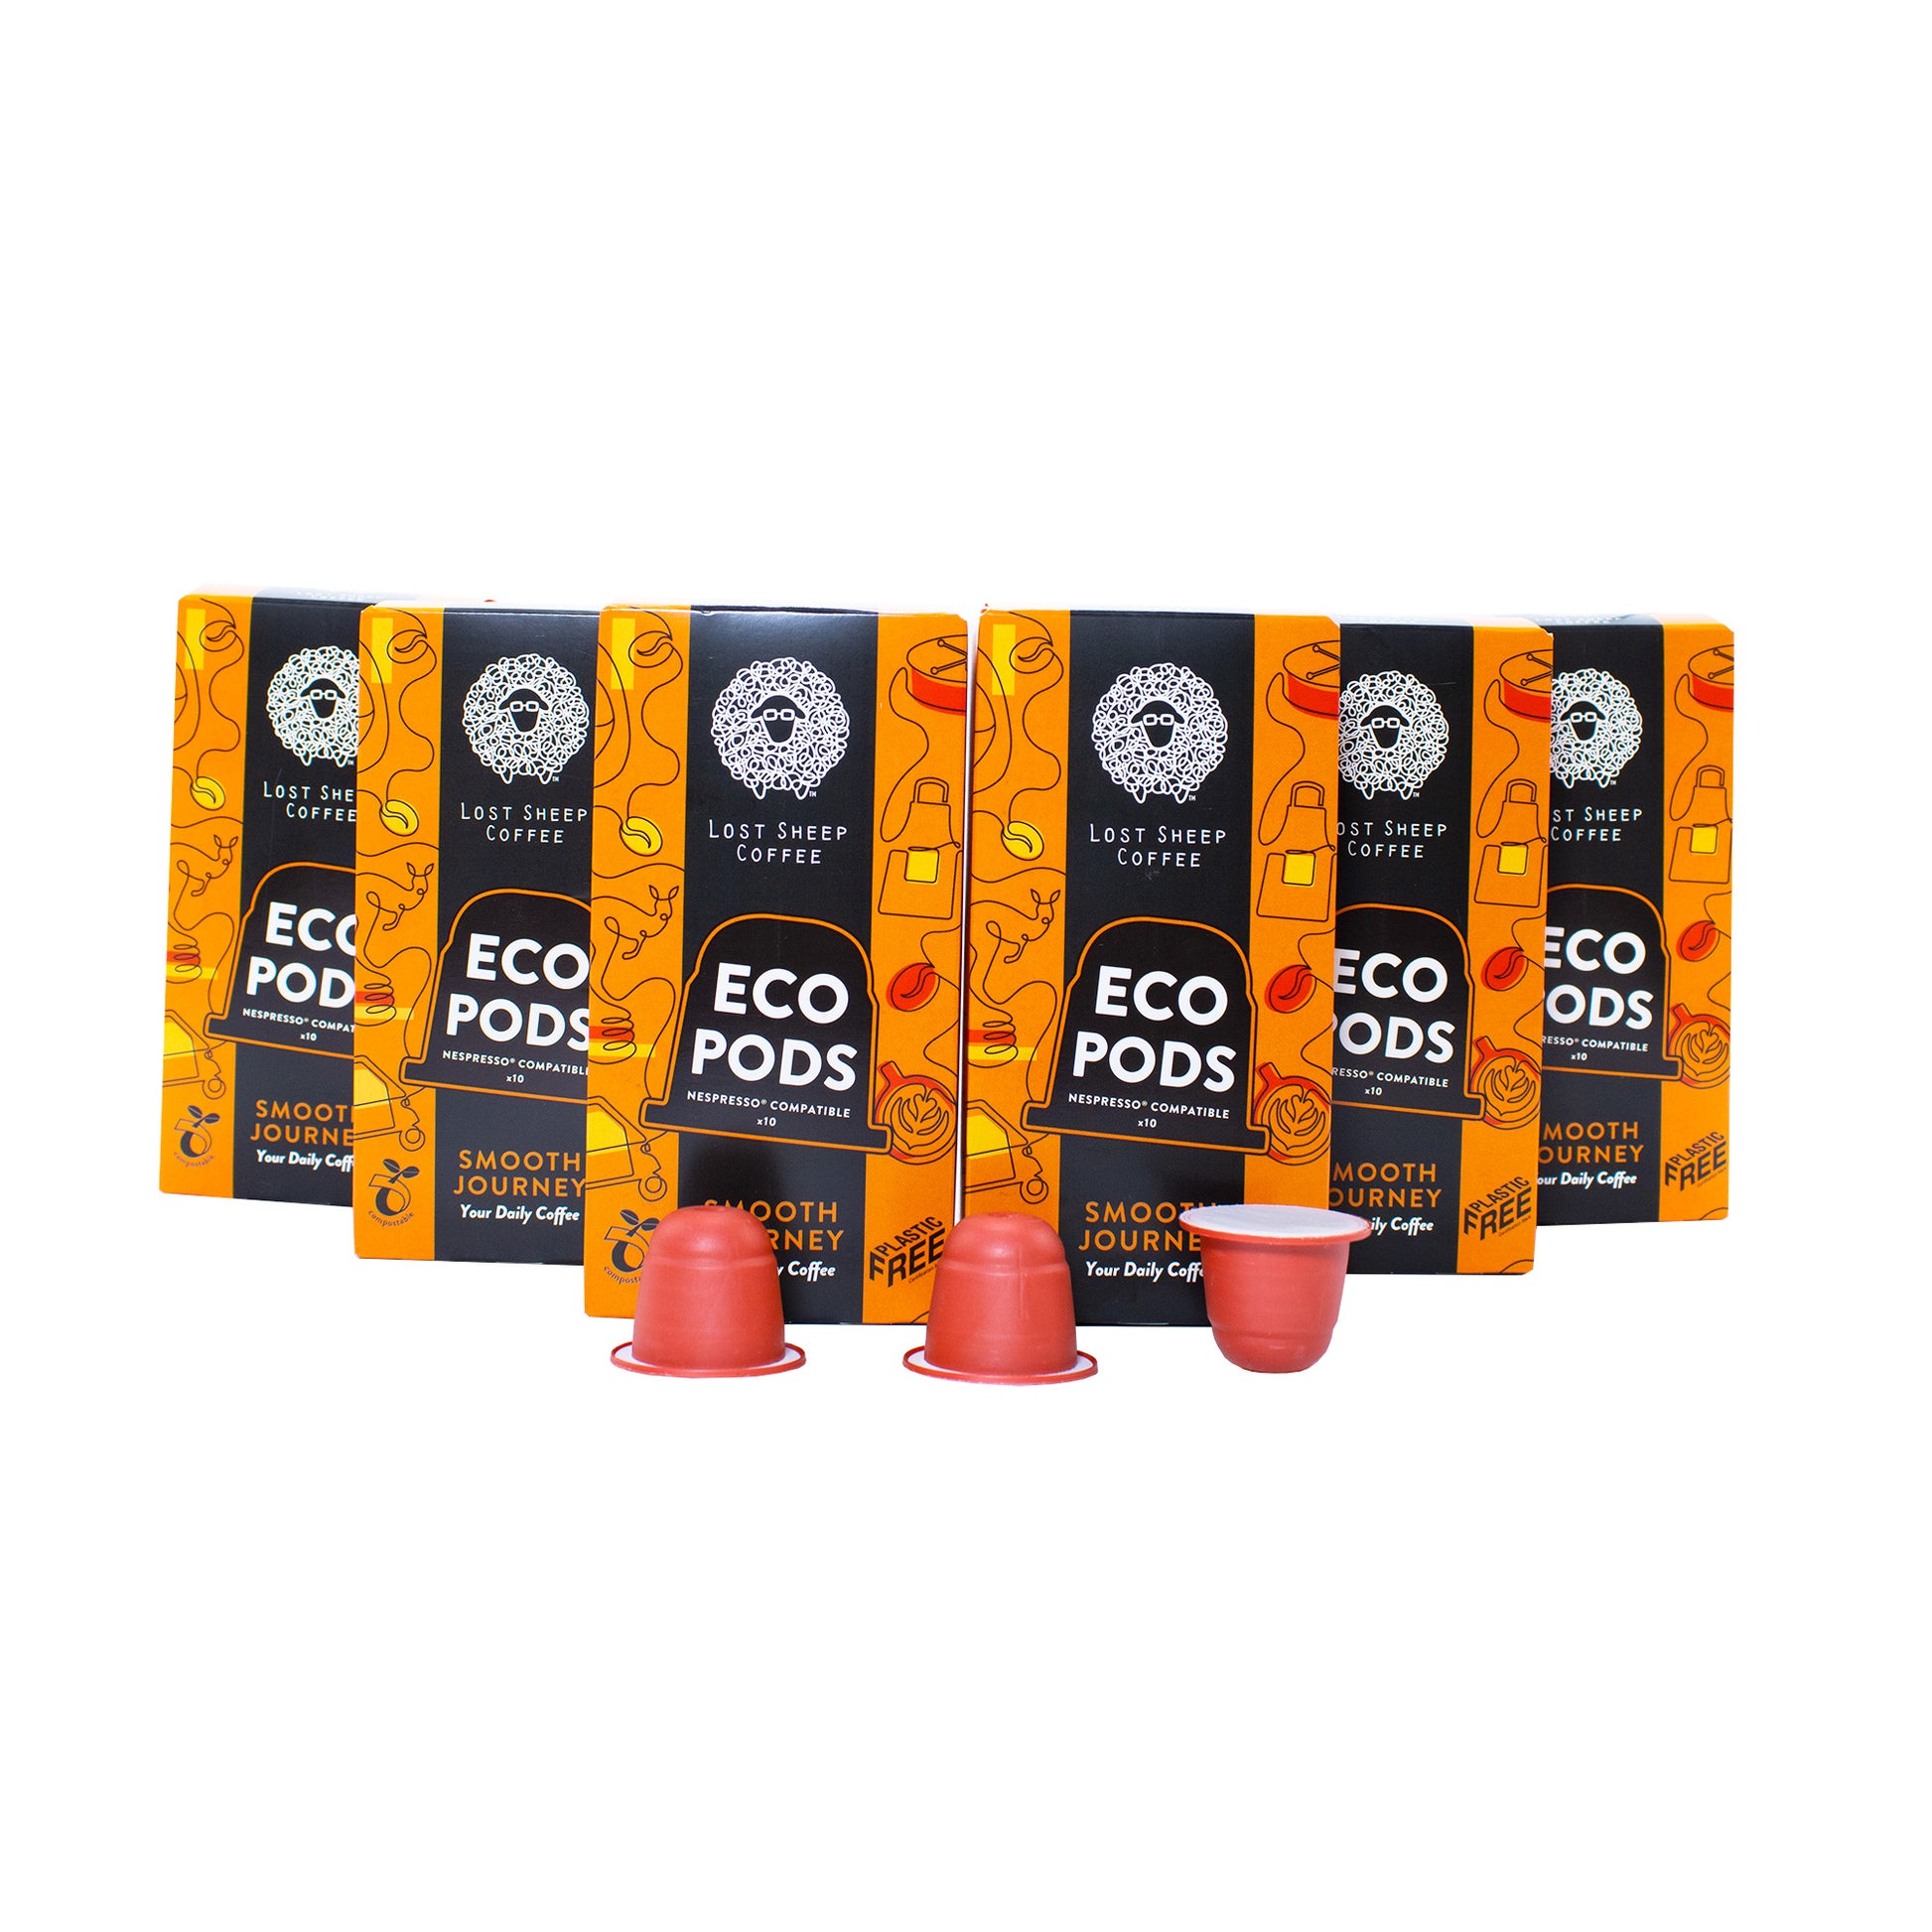 Lost Sheep Coffee eco pods selection